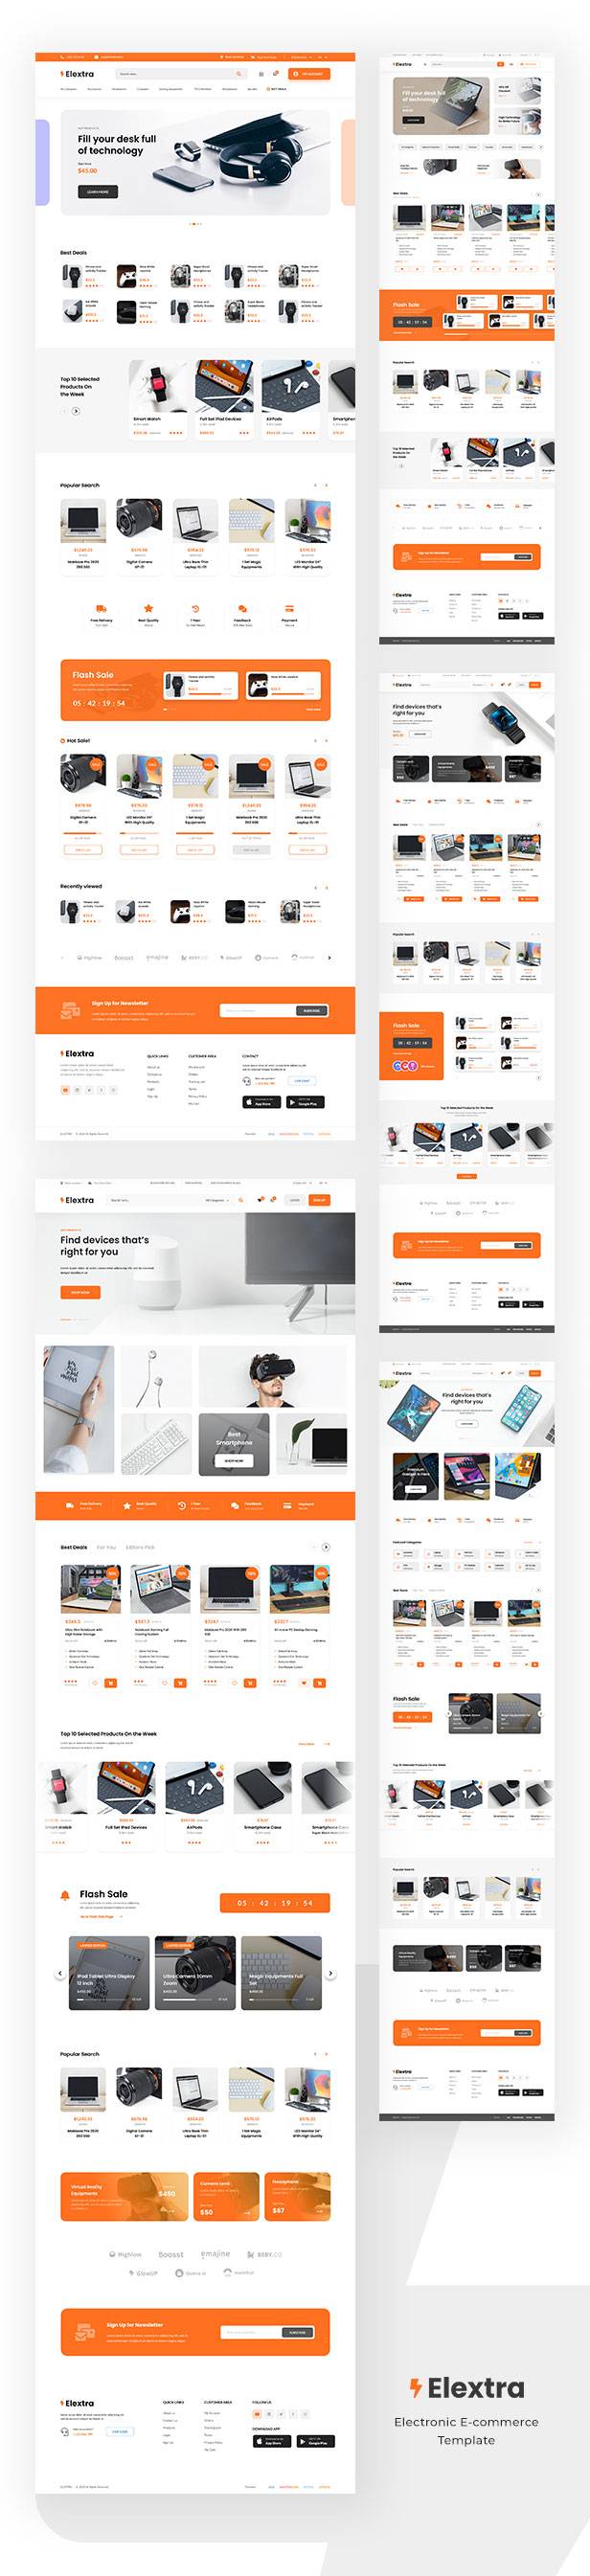 Elextra - Electronic eCommerce PSD Template - 2